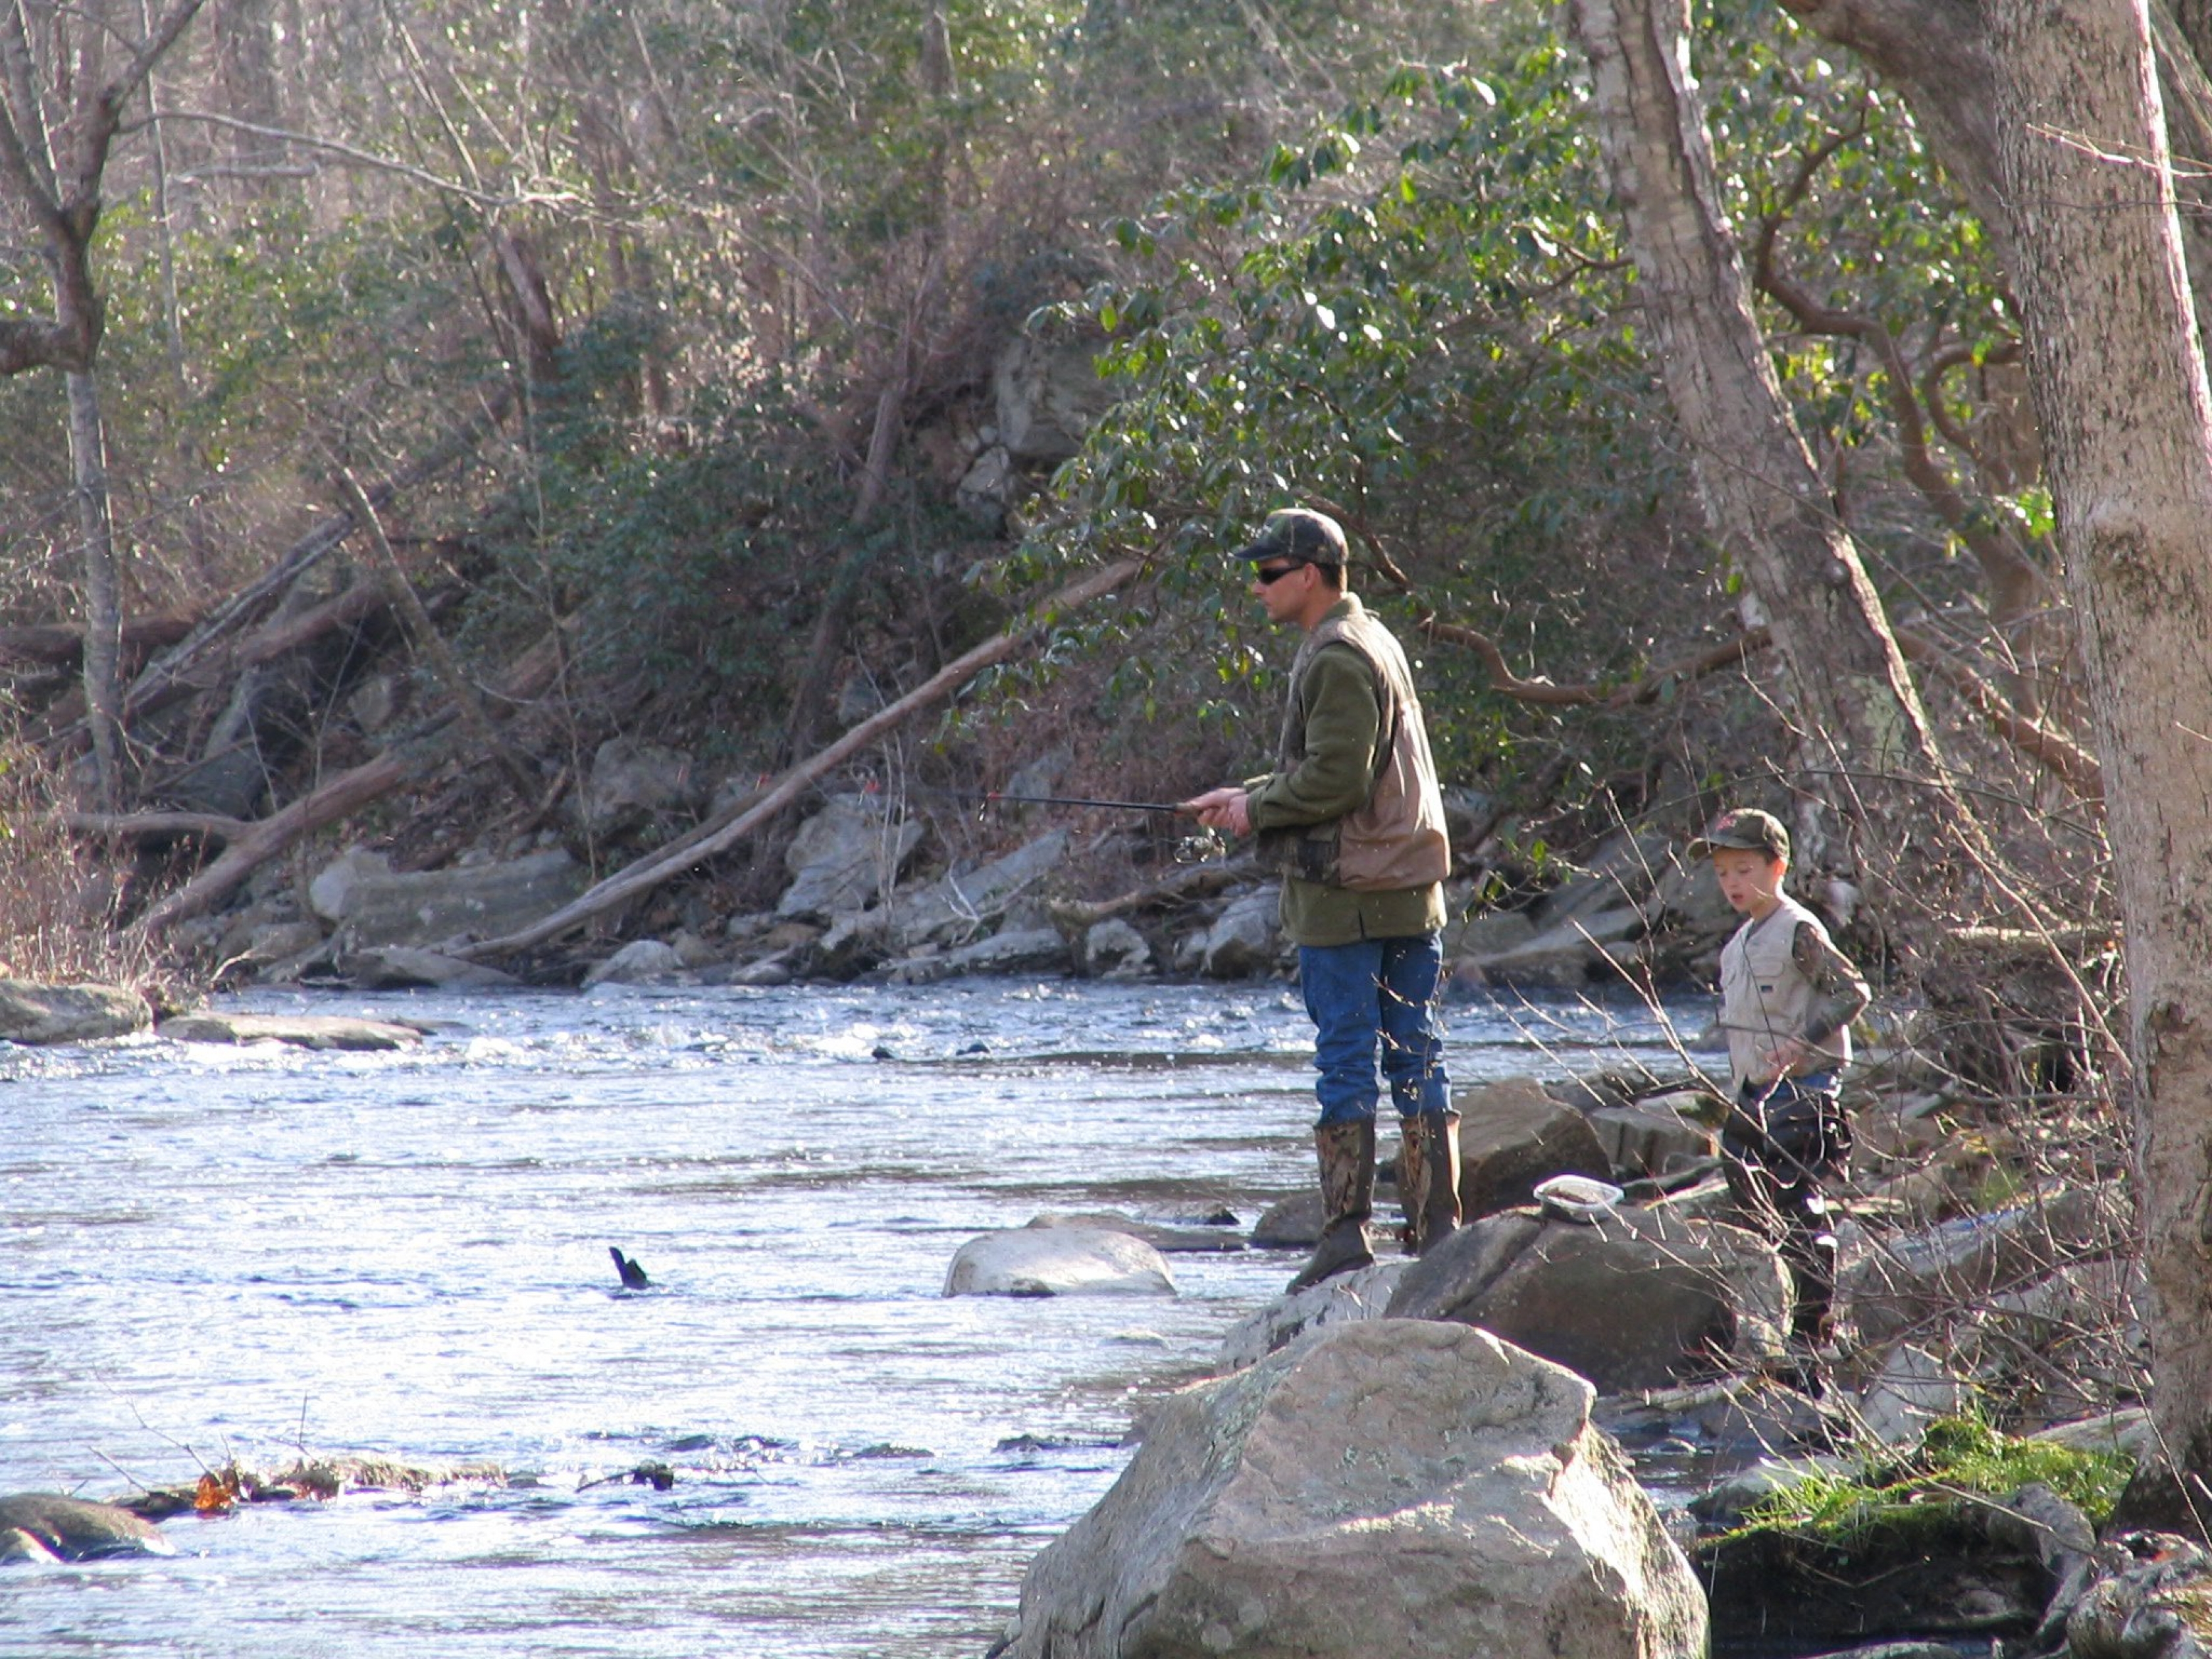 Old man and younger child fishing along the Eightmile River